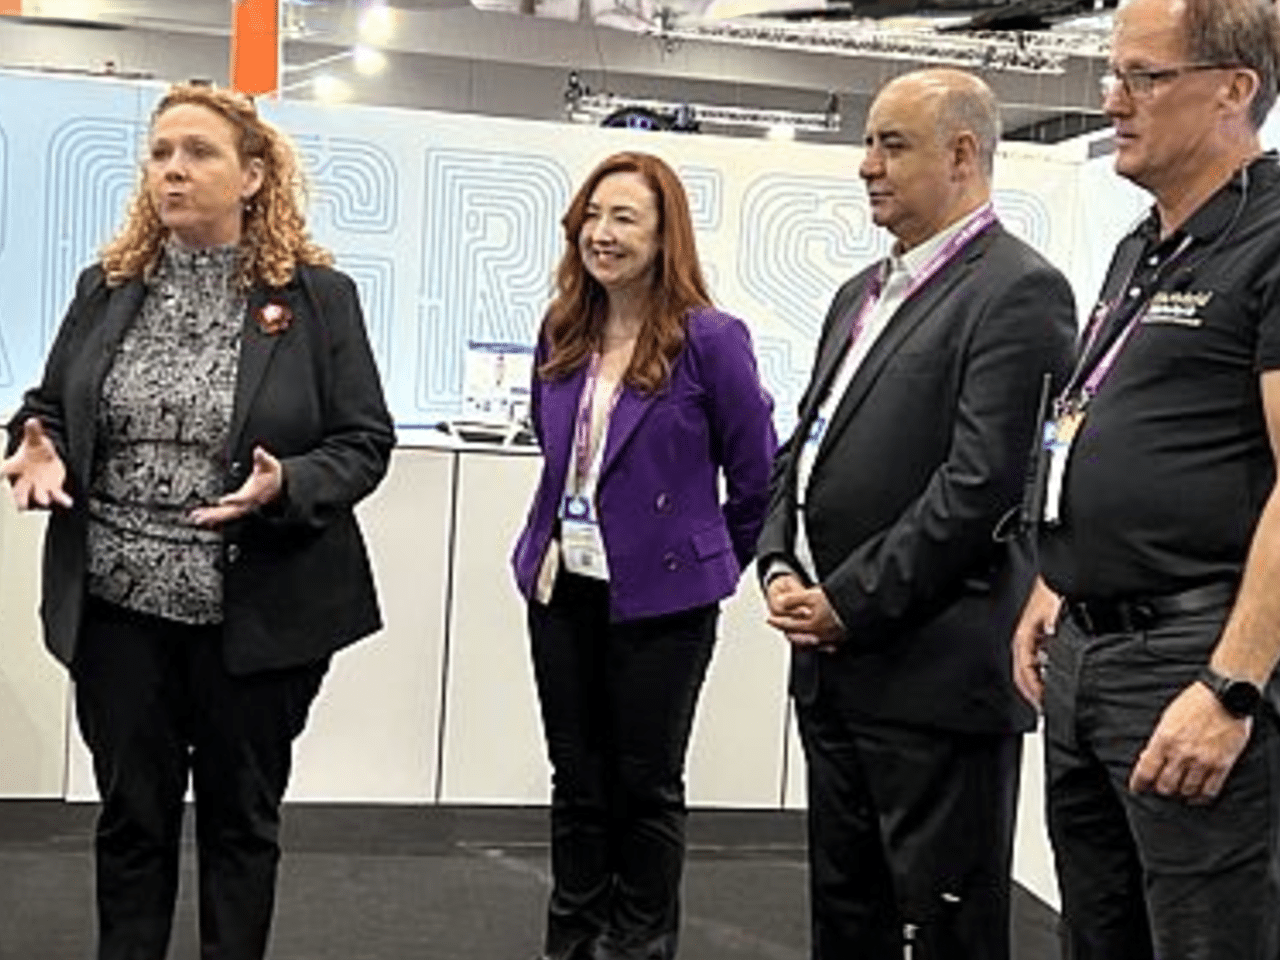 Victorian Minister Commends Automotive Industry Innovations at Expo